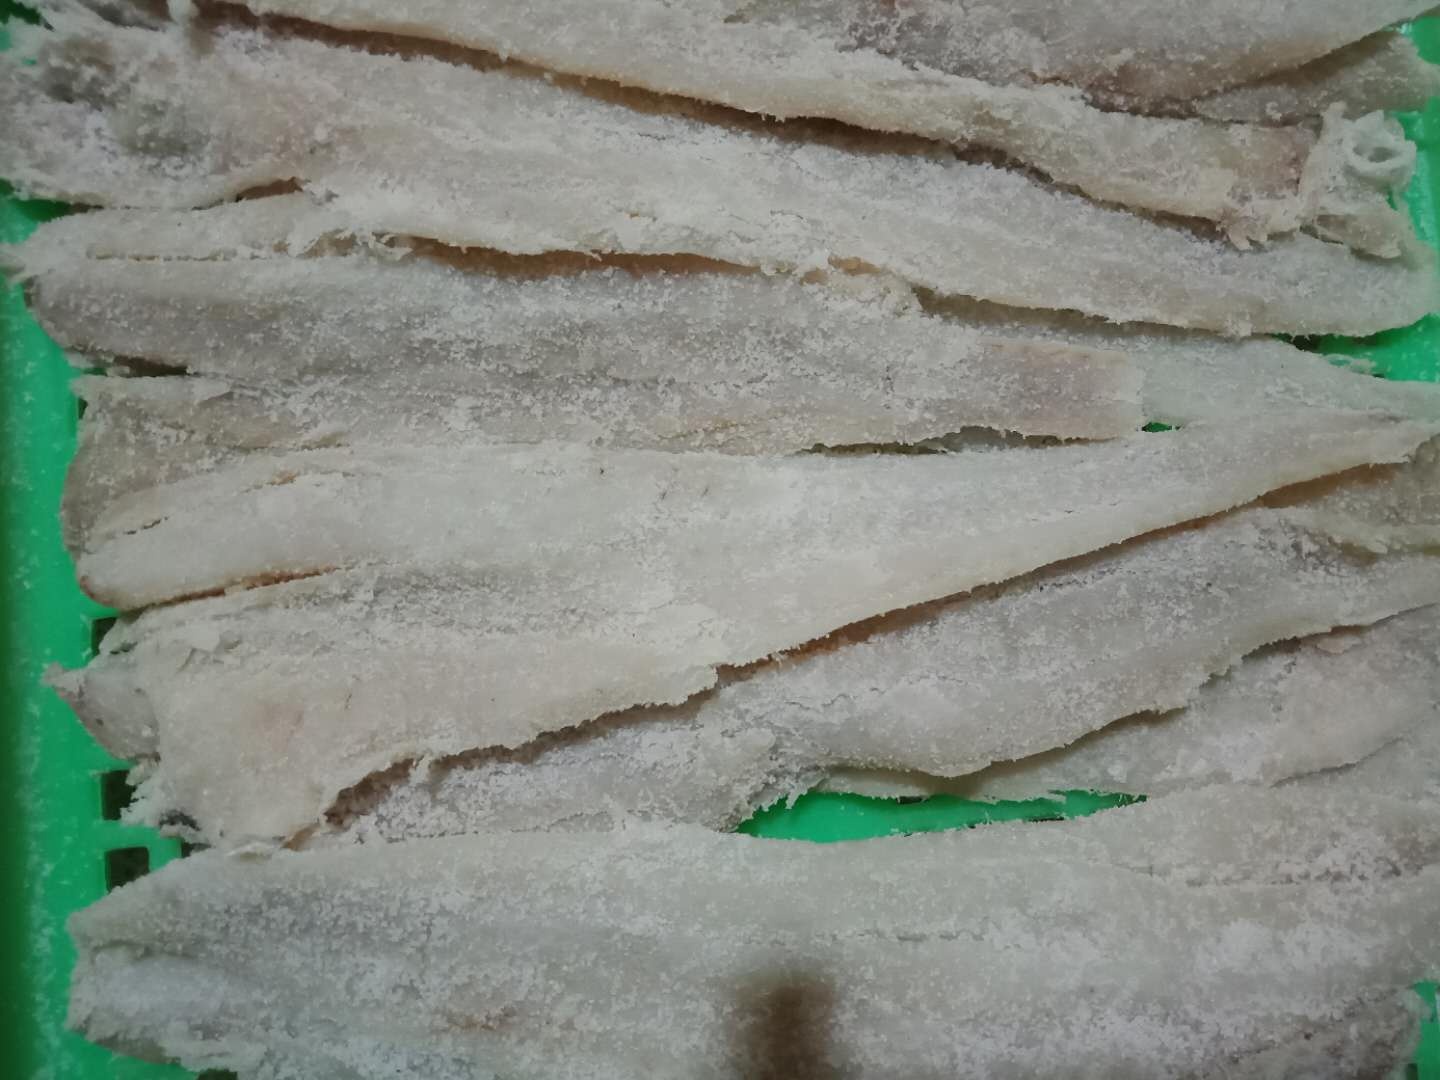 DRY SALTED POLLOCK FILLET